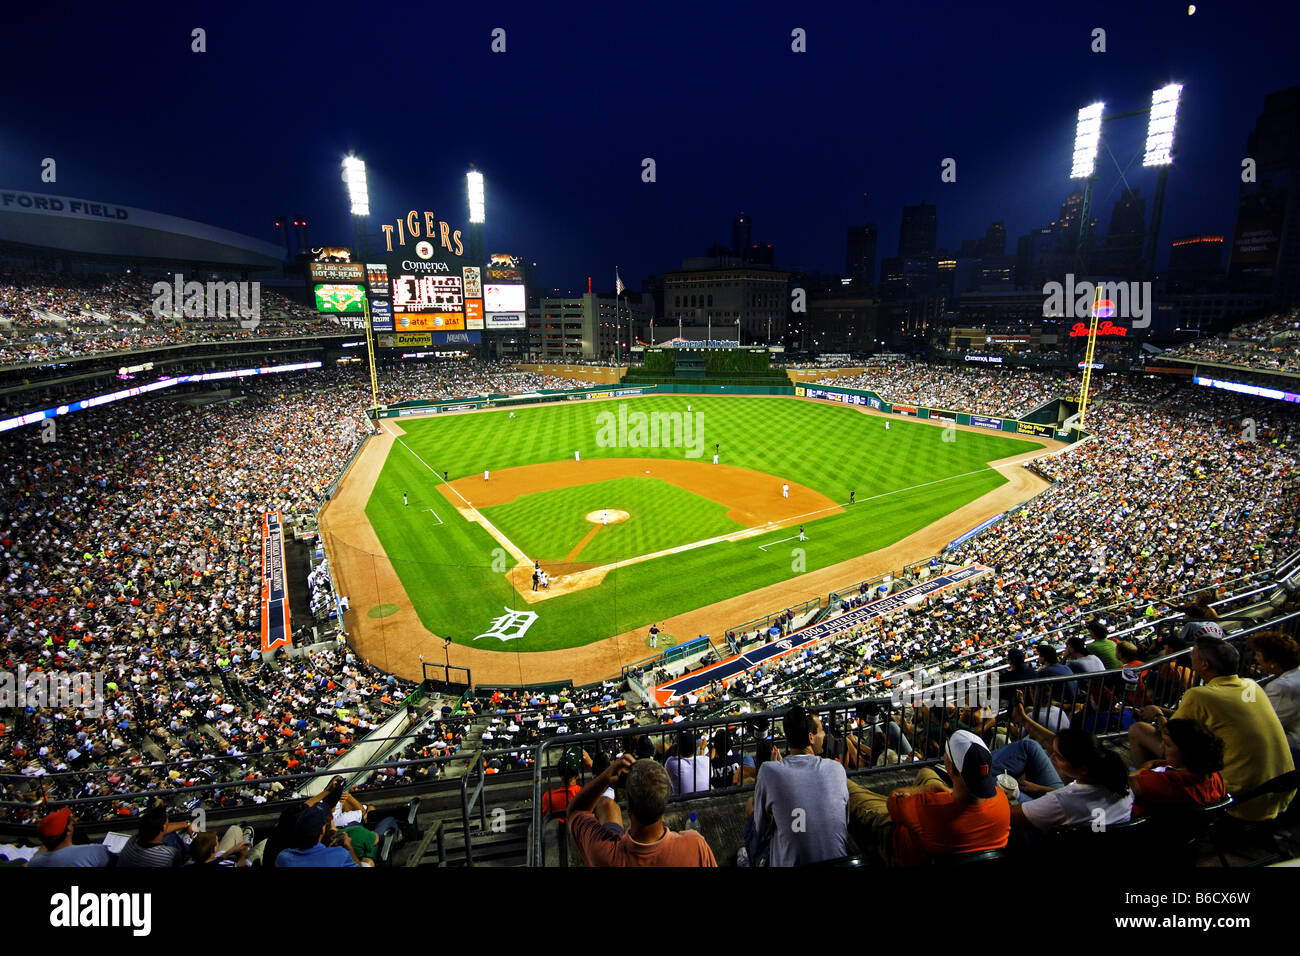 Comerica Park, home of the Detroit Tigers in Downtown Detroit Michigan. Stock Photo